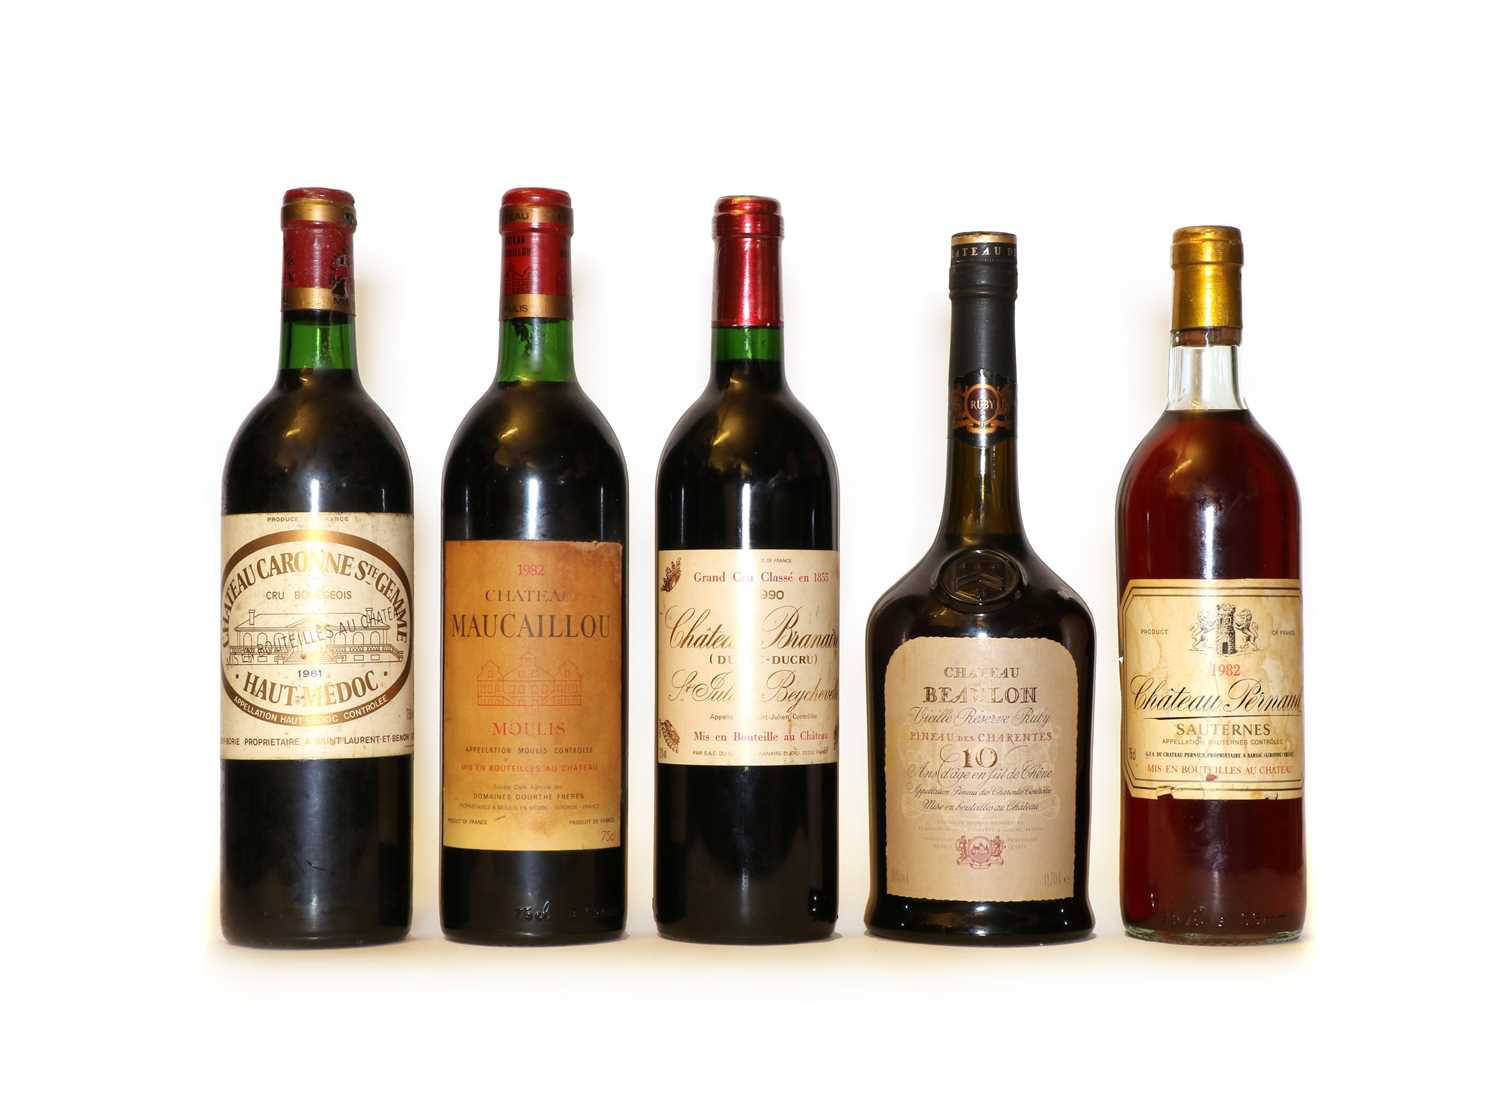 Miscellenous wines: Chateau Pernaud, Sauternes, 1982, (1) and four various others, (5)